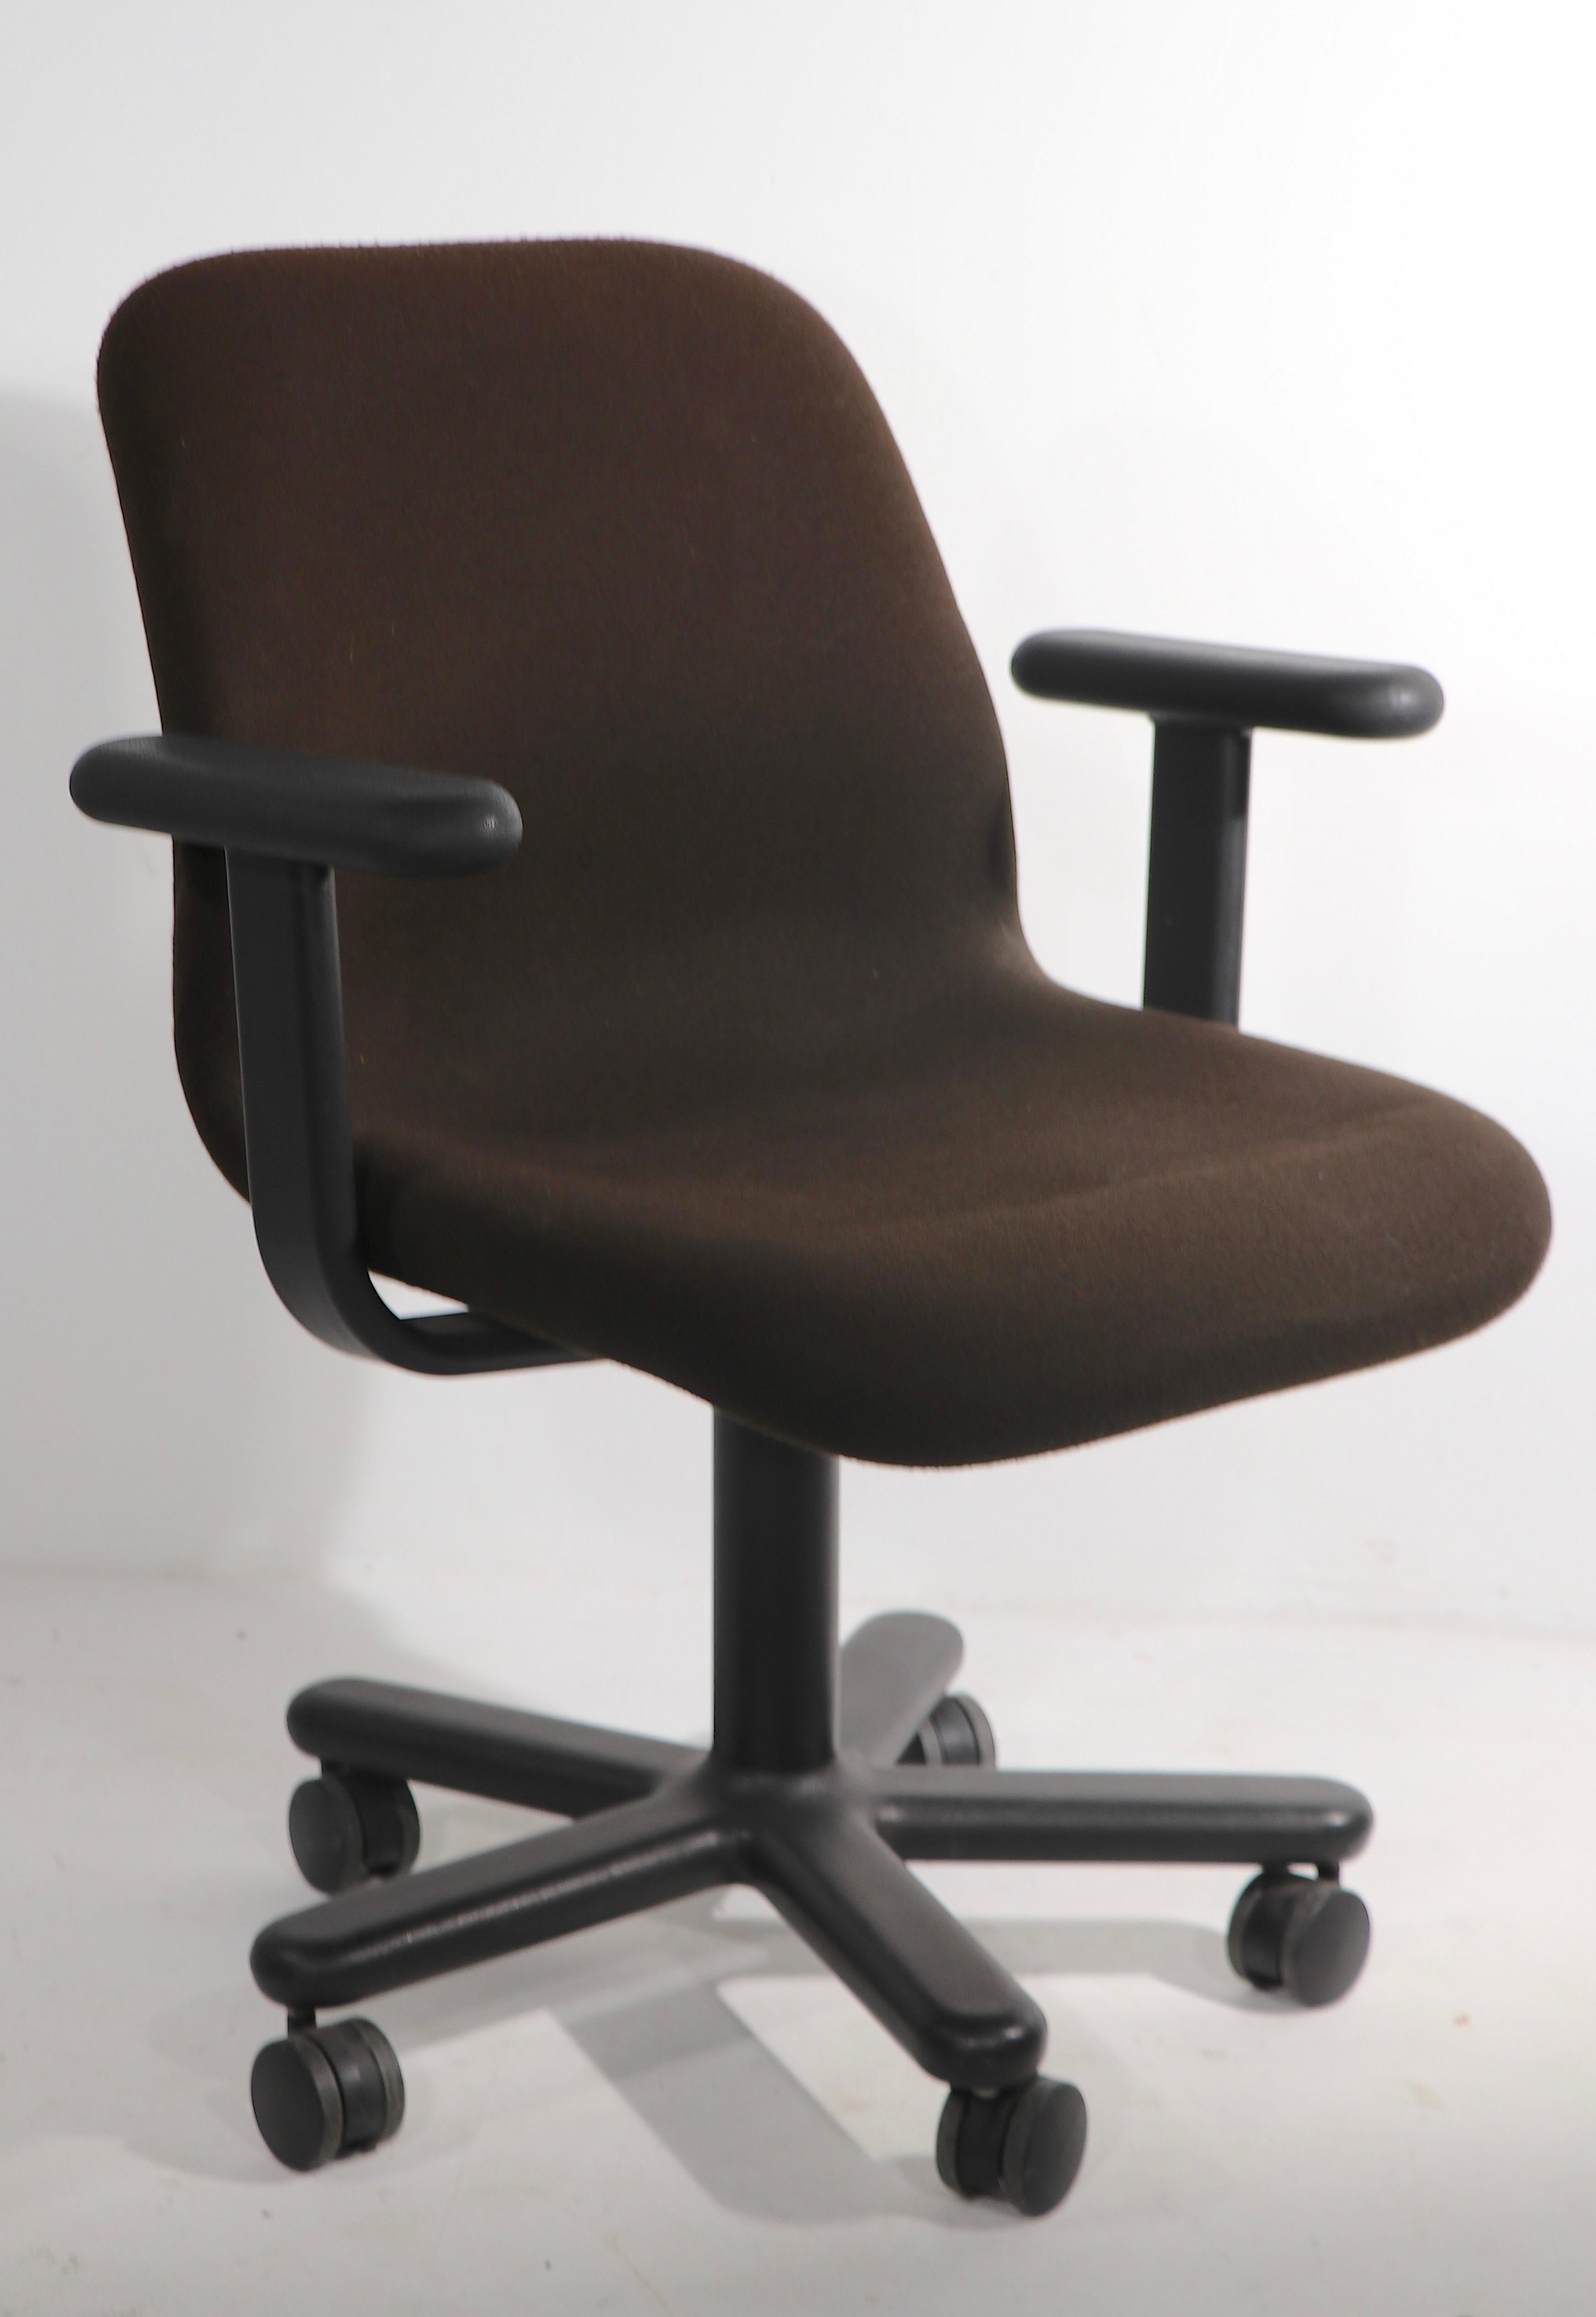 Exceptional Knoll swivel desk chair(s) from the 1970's, in rich brown formed foam upholstery, on five star base. The chair swivels a full 360, and the base is on double wheel coaster feet, making this ergonomic chair extremely functional and well as